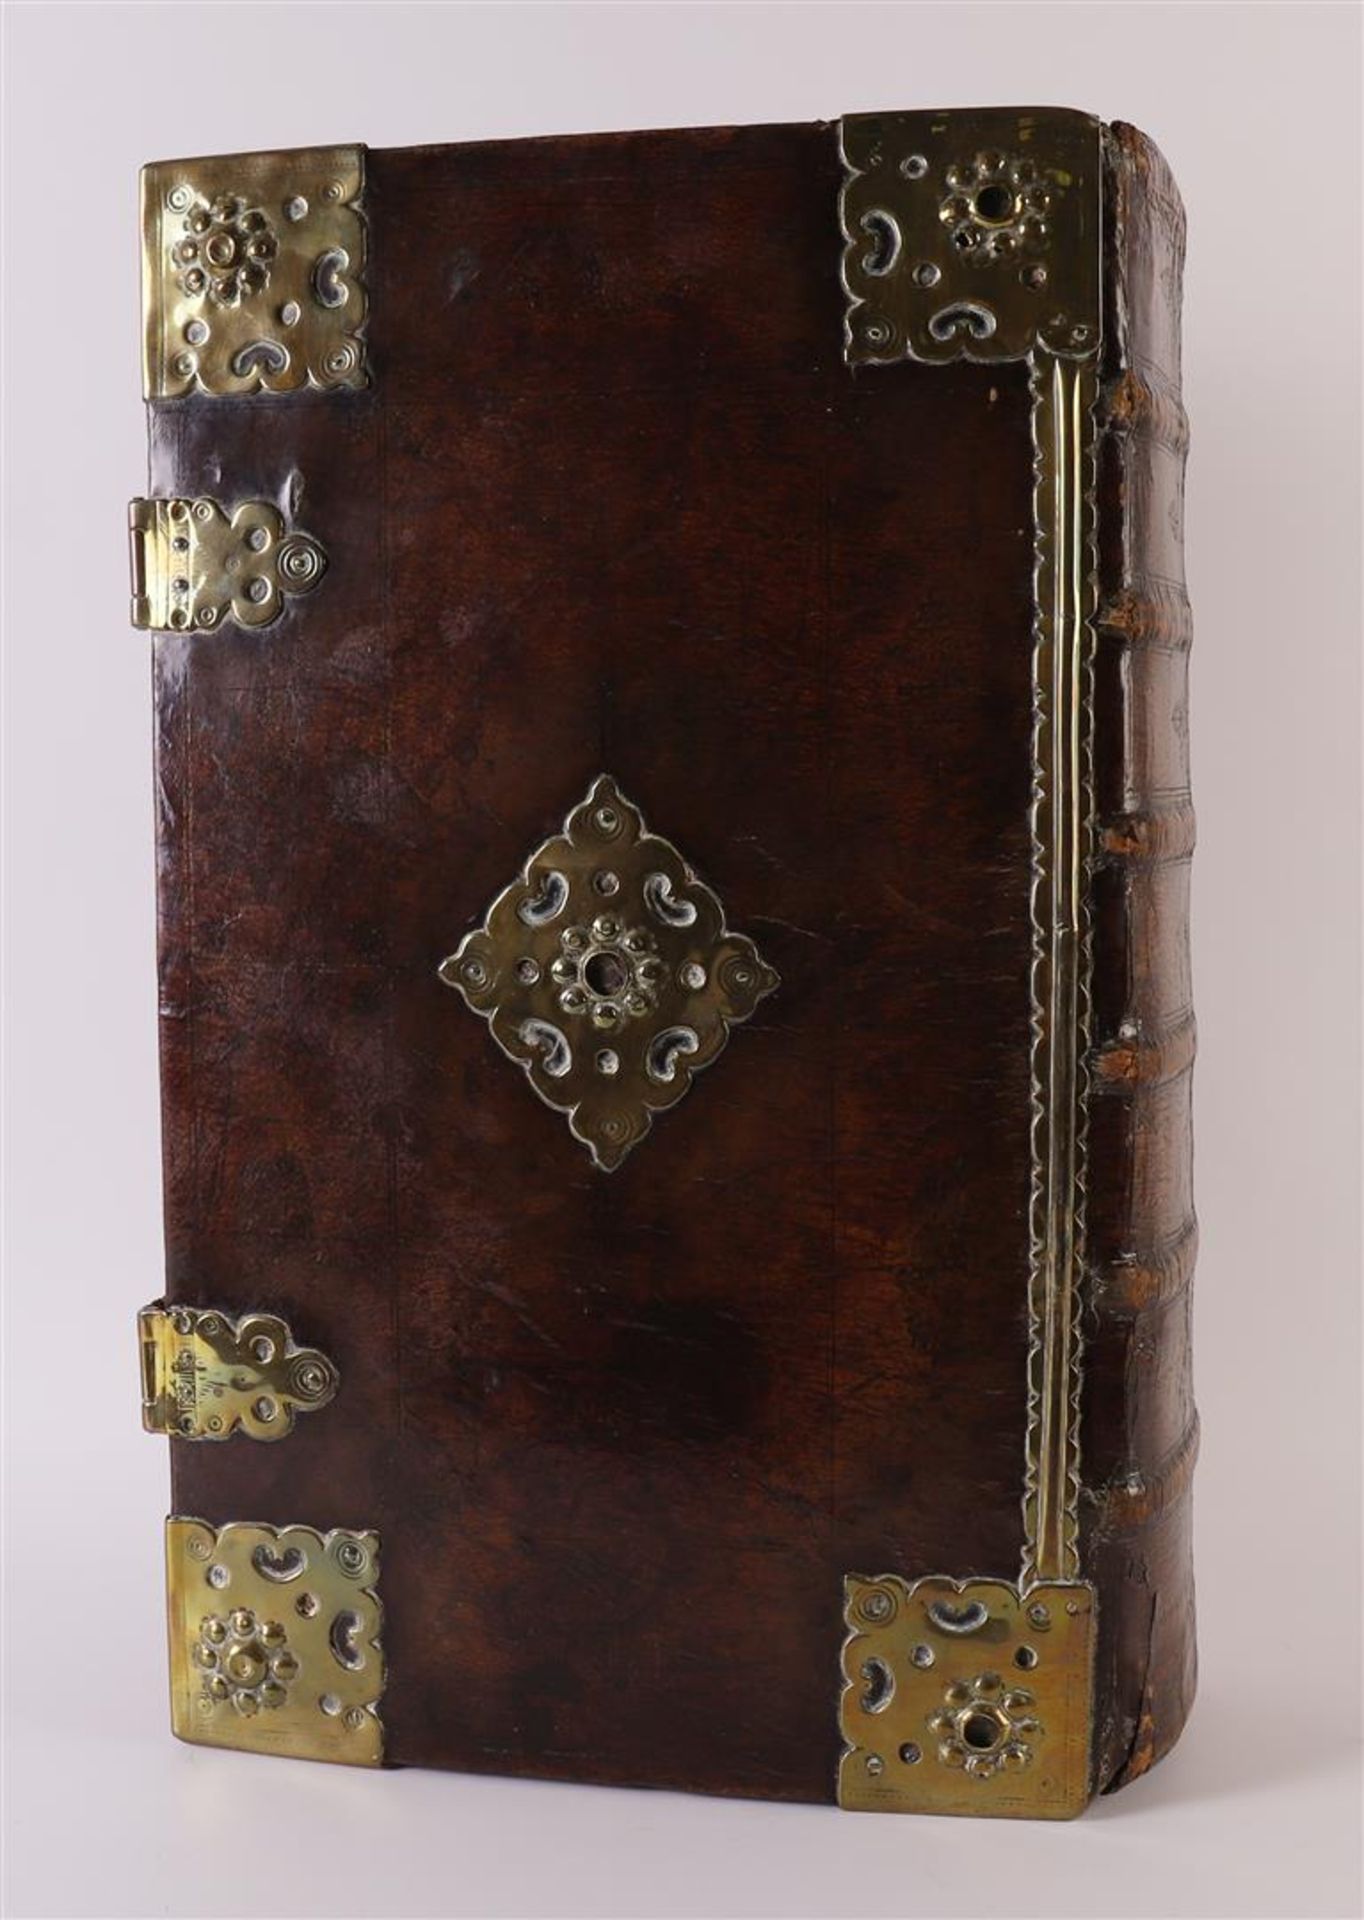 A State Bible in original brown leather binding with brass fittings and clasps, heirs Paulus Aertsz. - Image 4 of 12